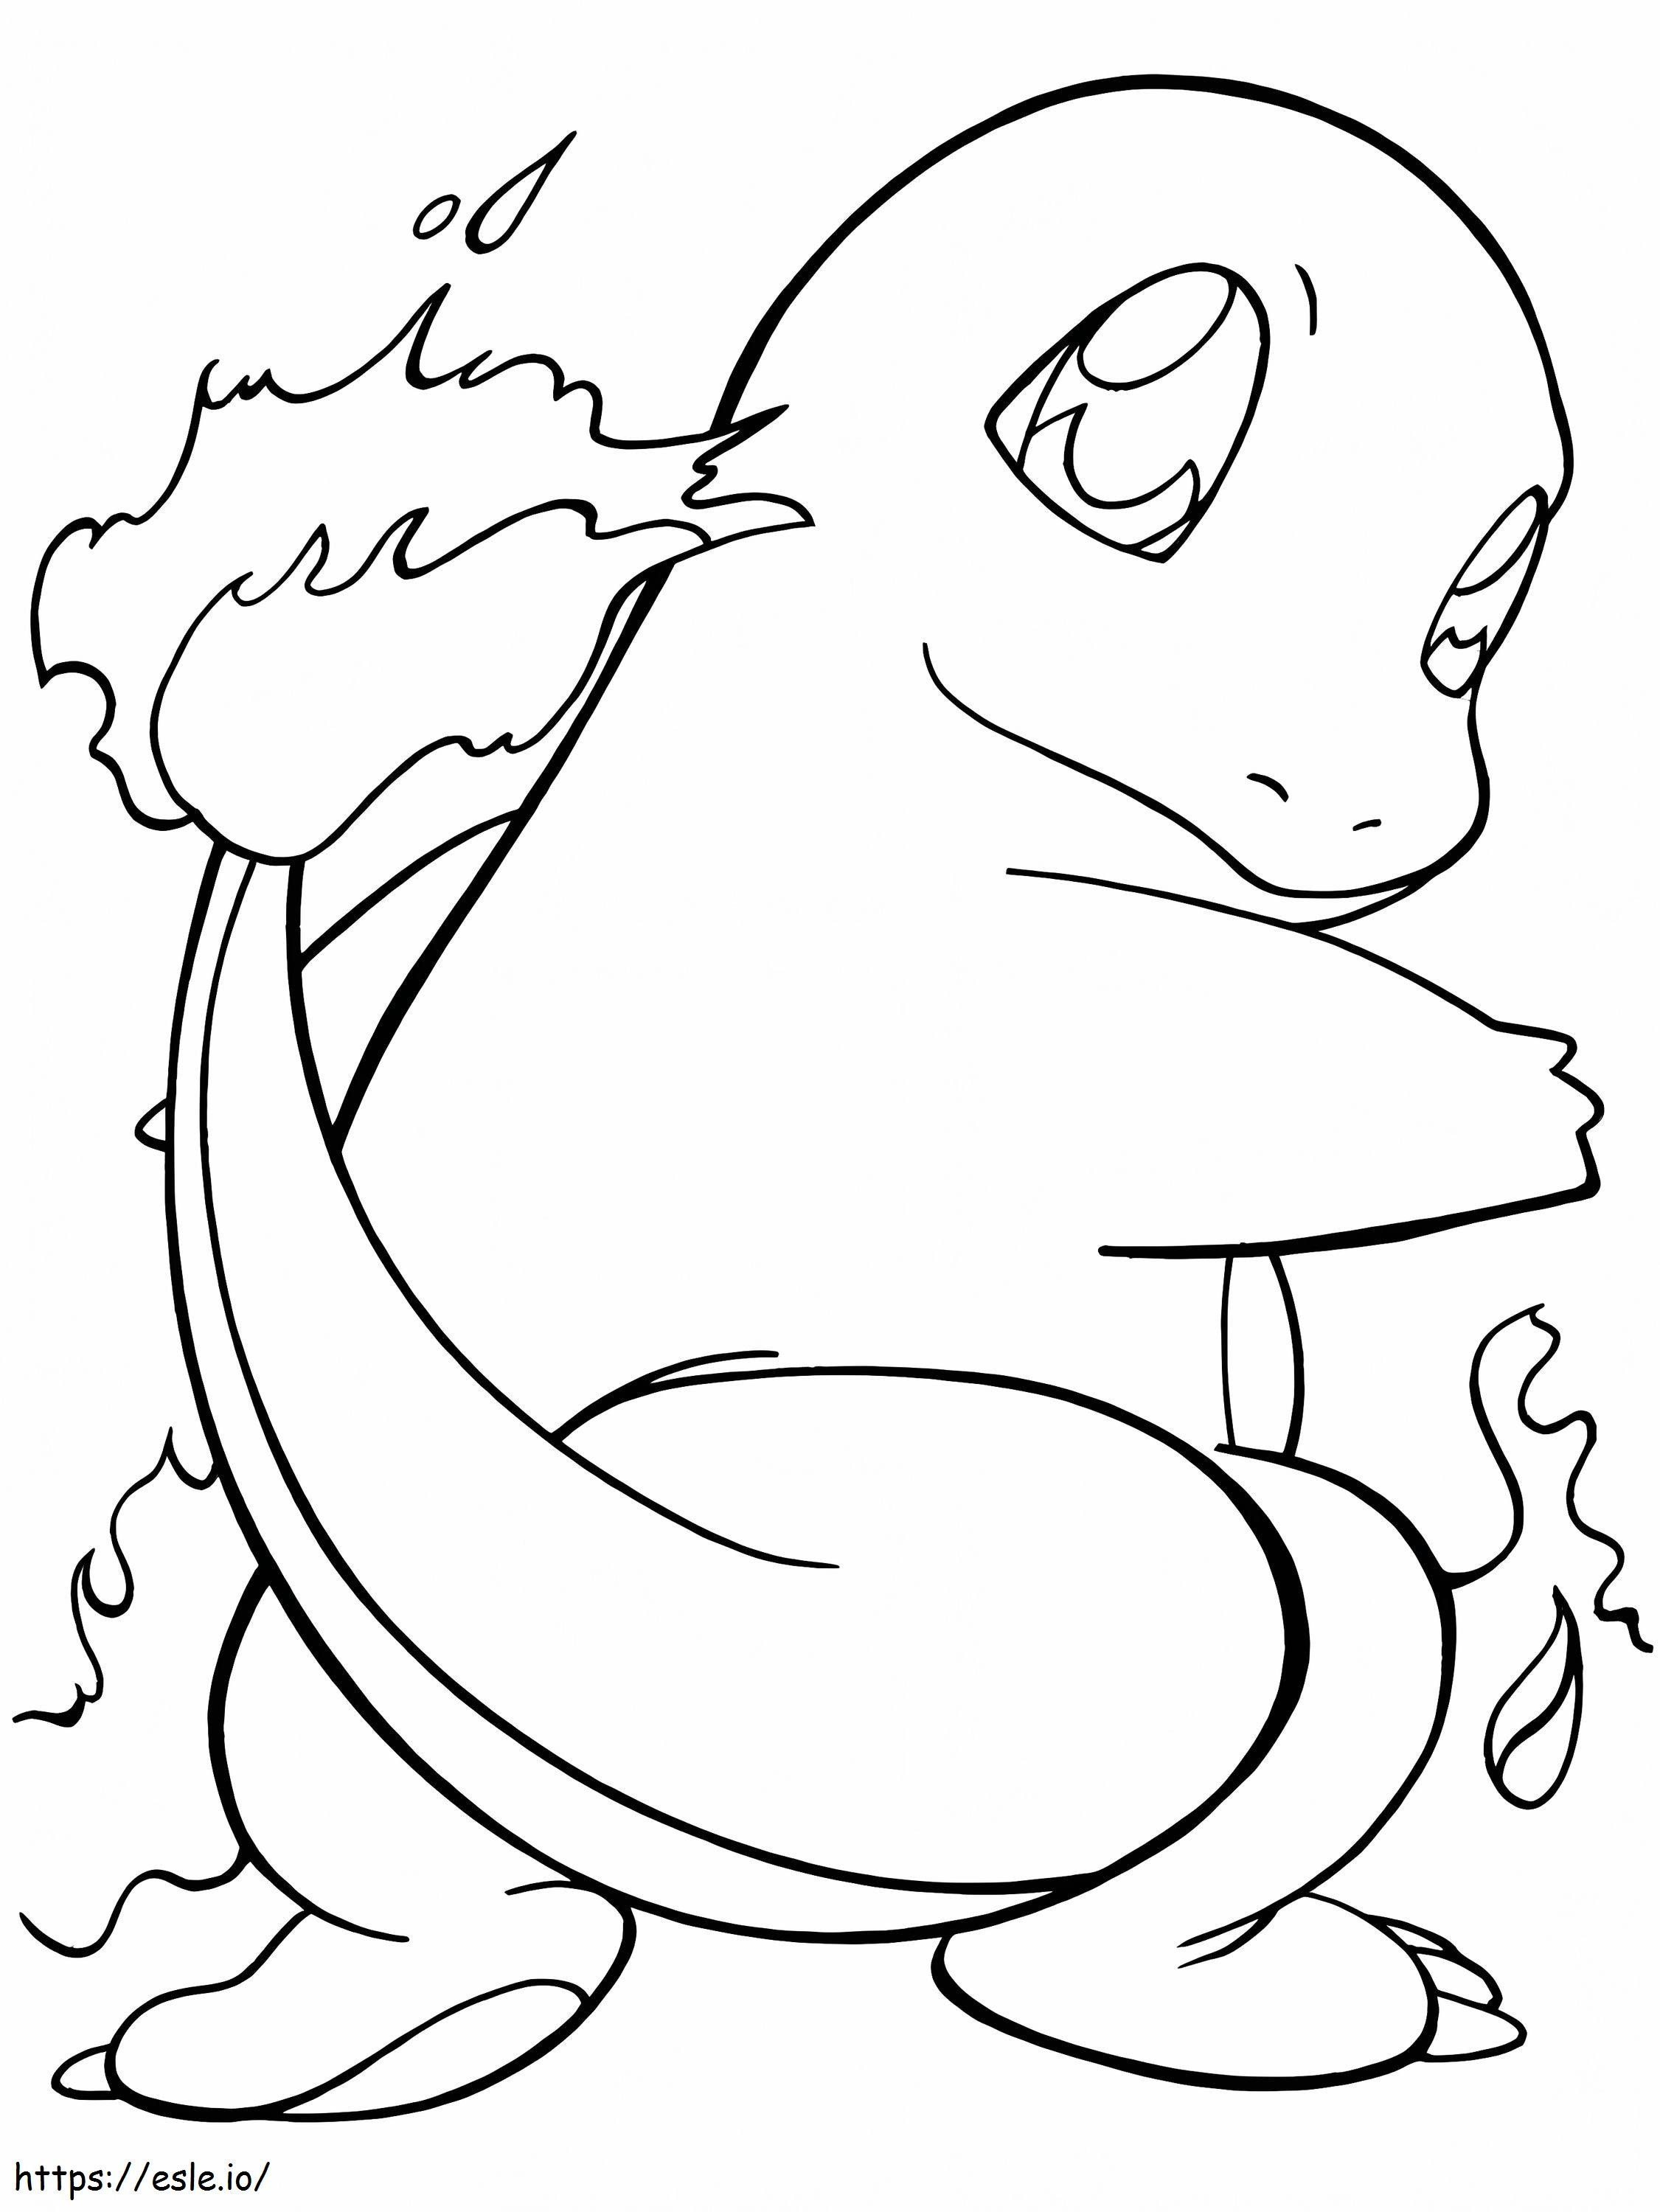 Lovely Charmander coloring page